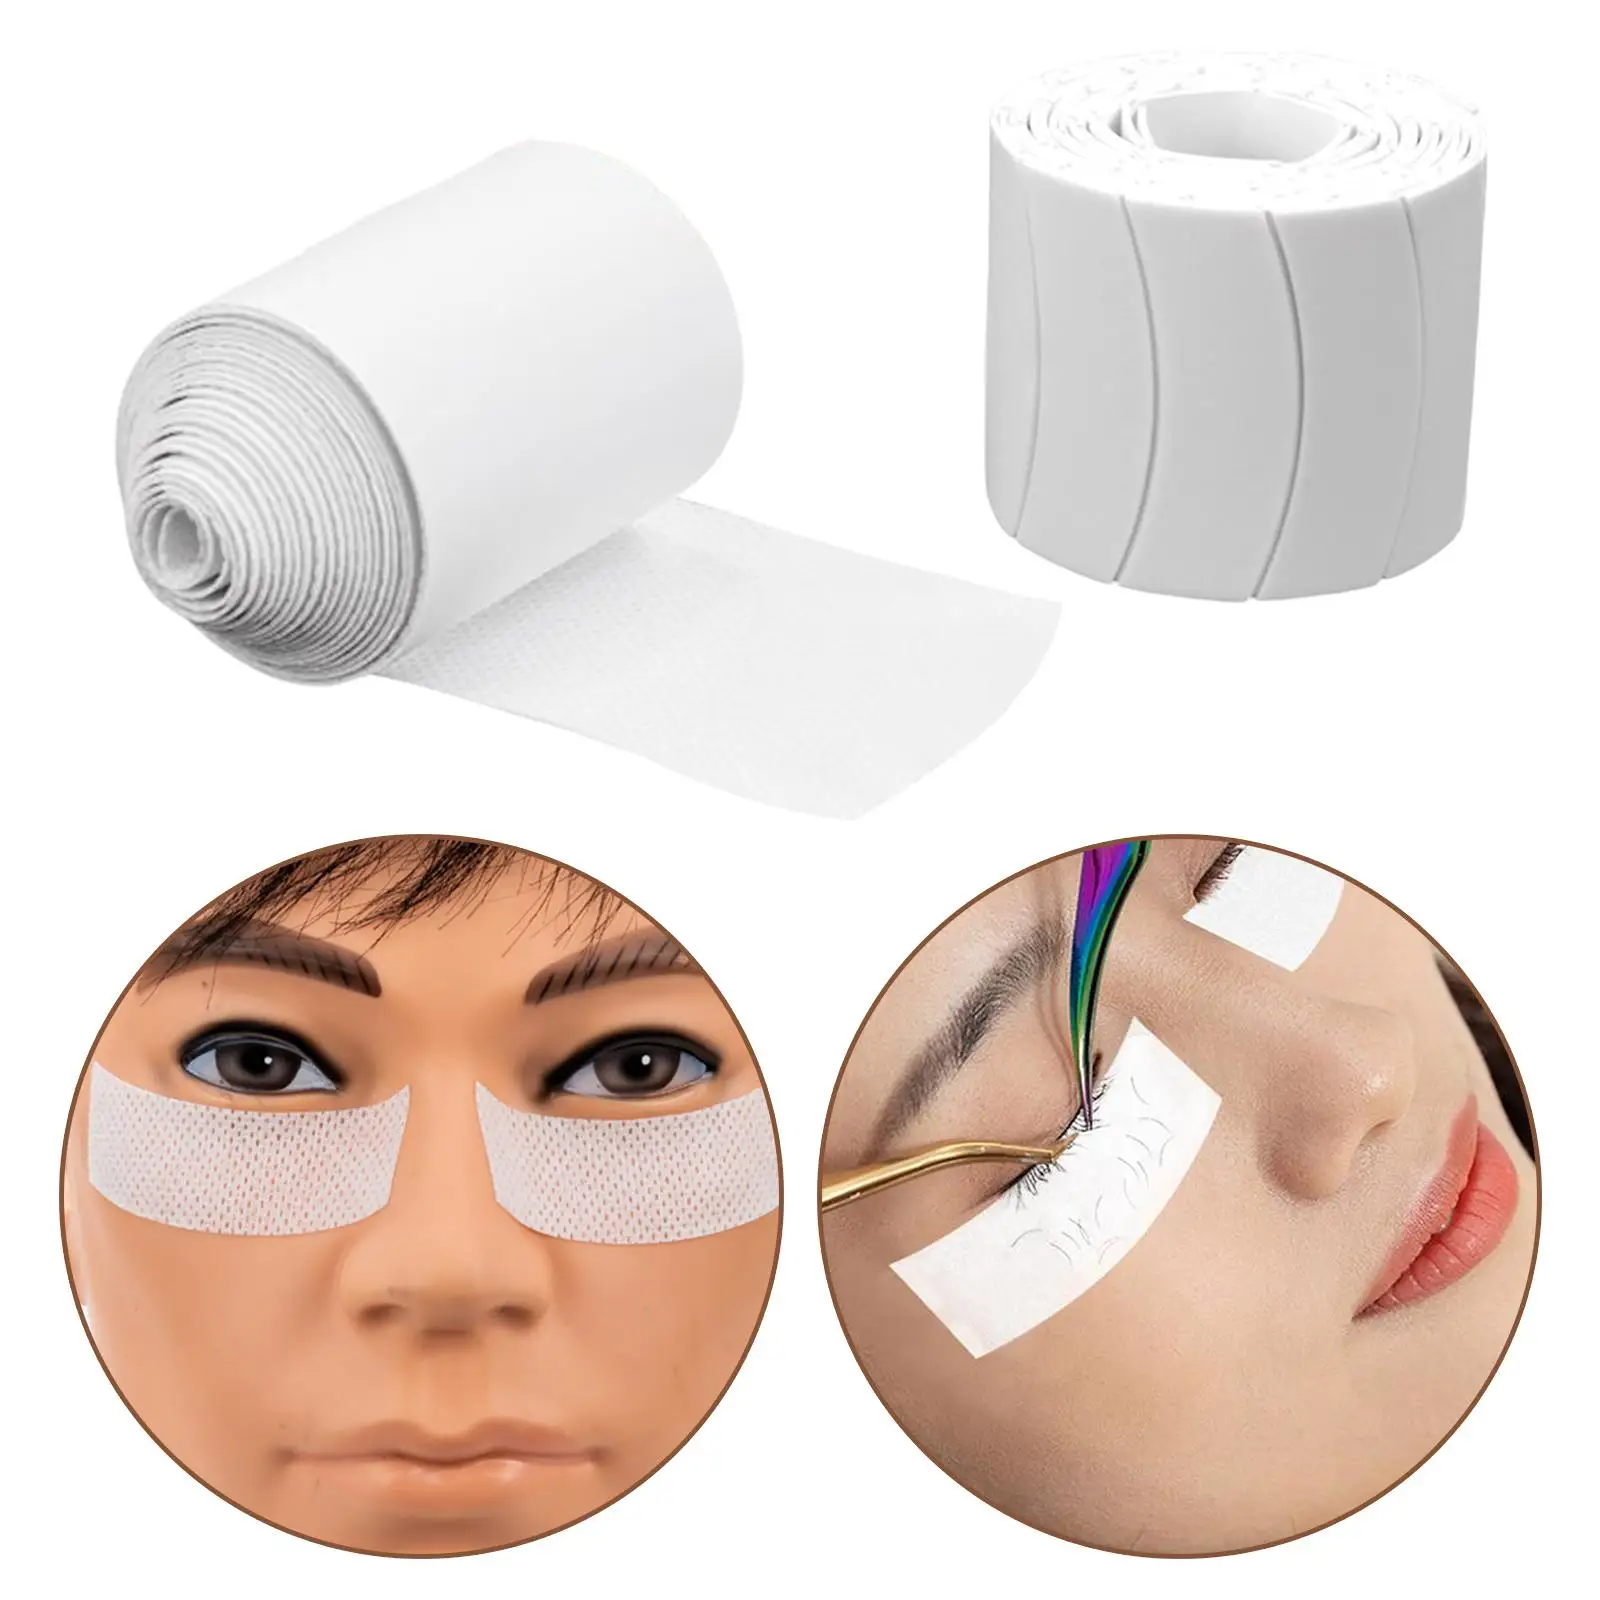 110 Pieces Lash Extension under Eye Pads Professional Sticker for Eyelash Extensions Lash Patches Sticker Guards Breathable